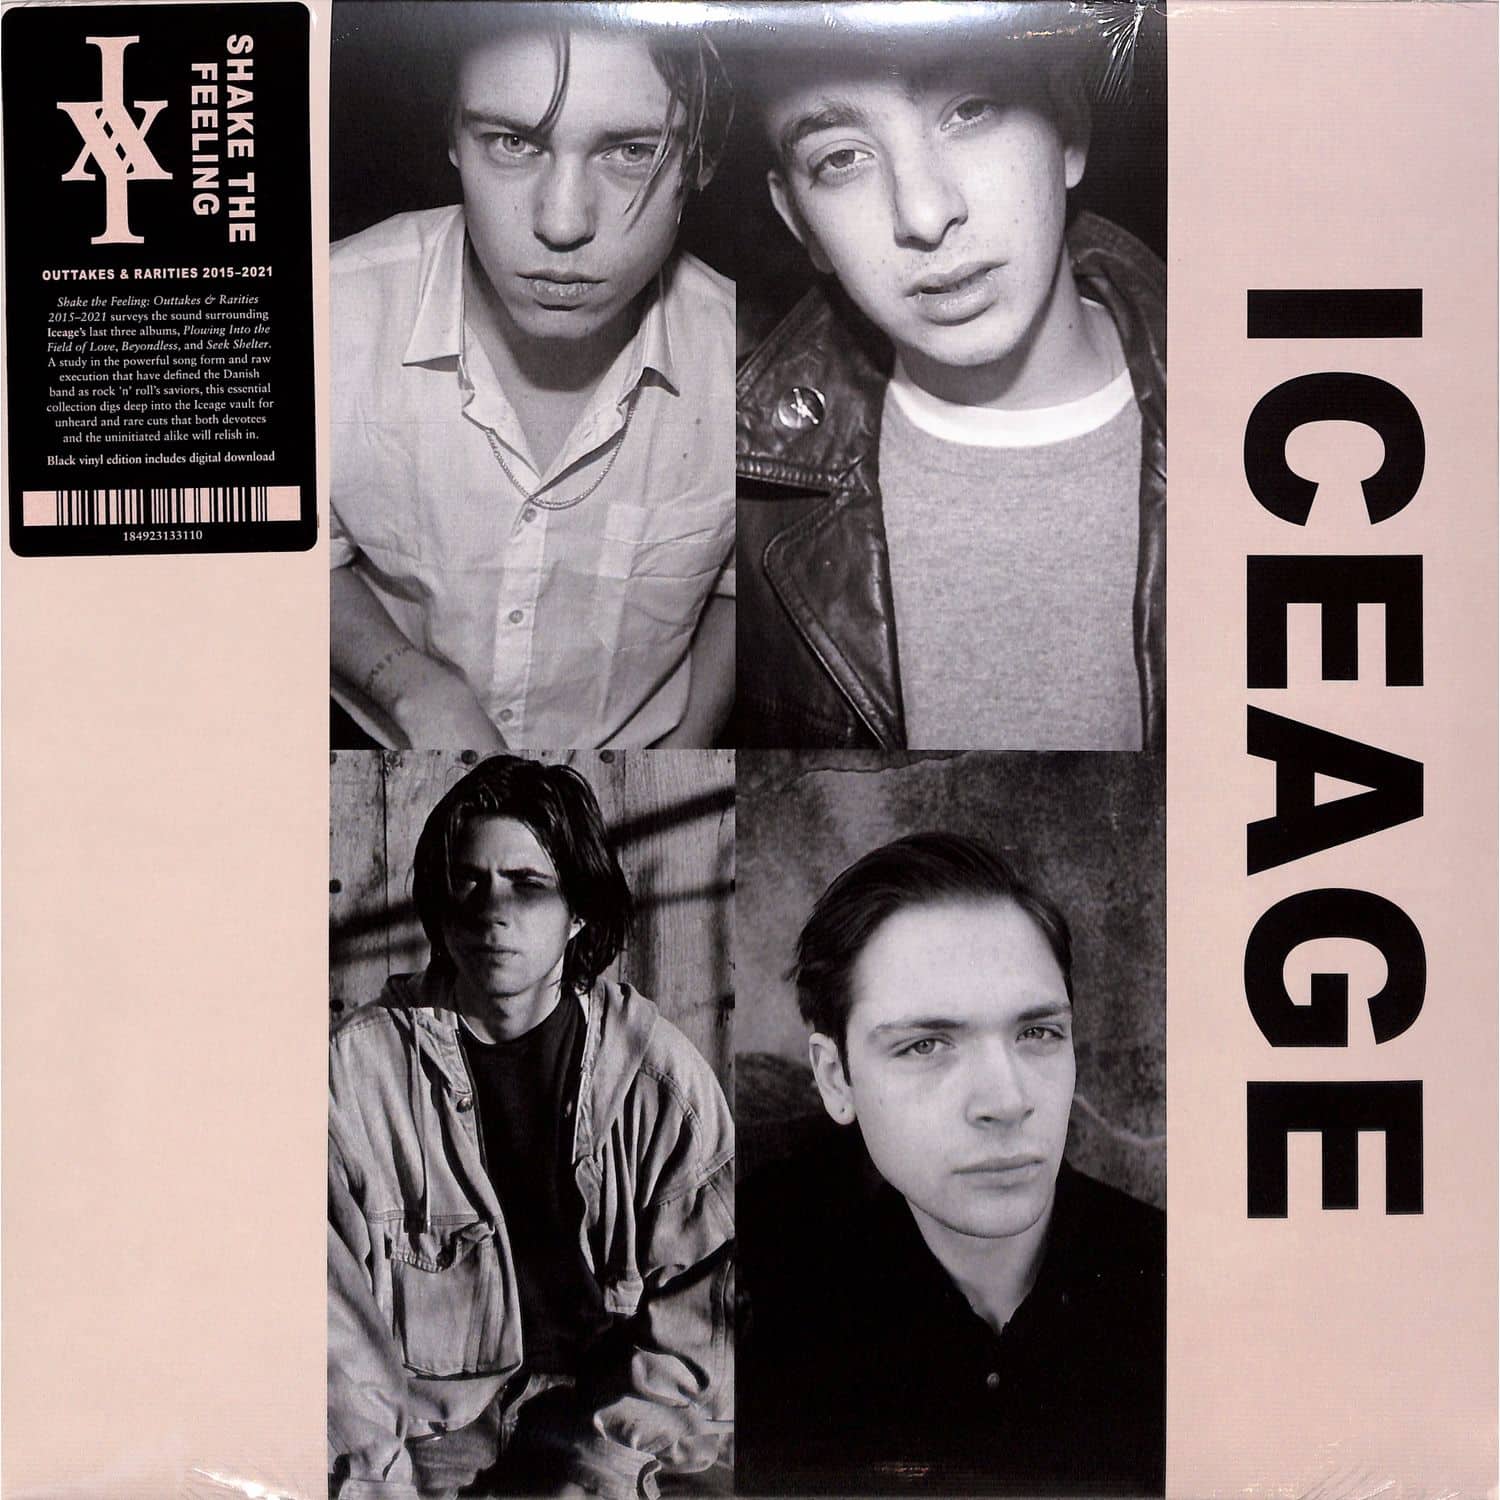 Iceage - SHAKE THE FEELING: OUTTAKES & RARITIES 2015-2021 